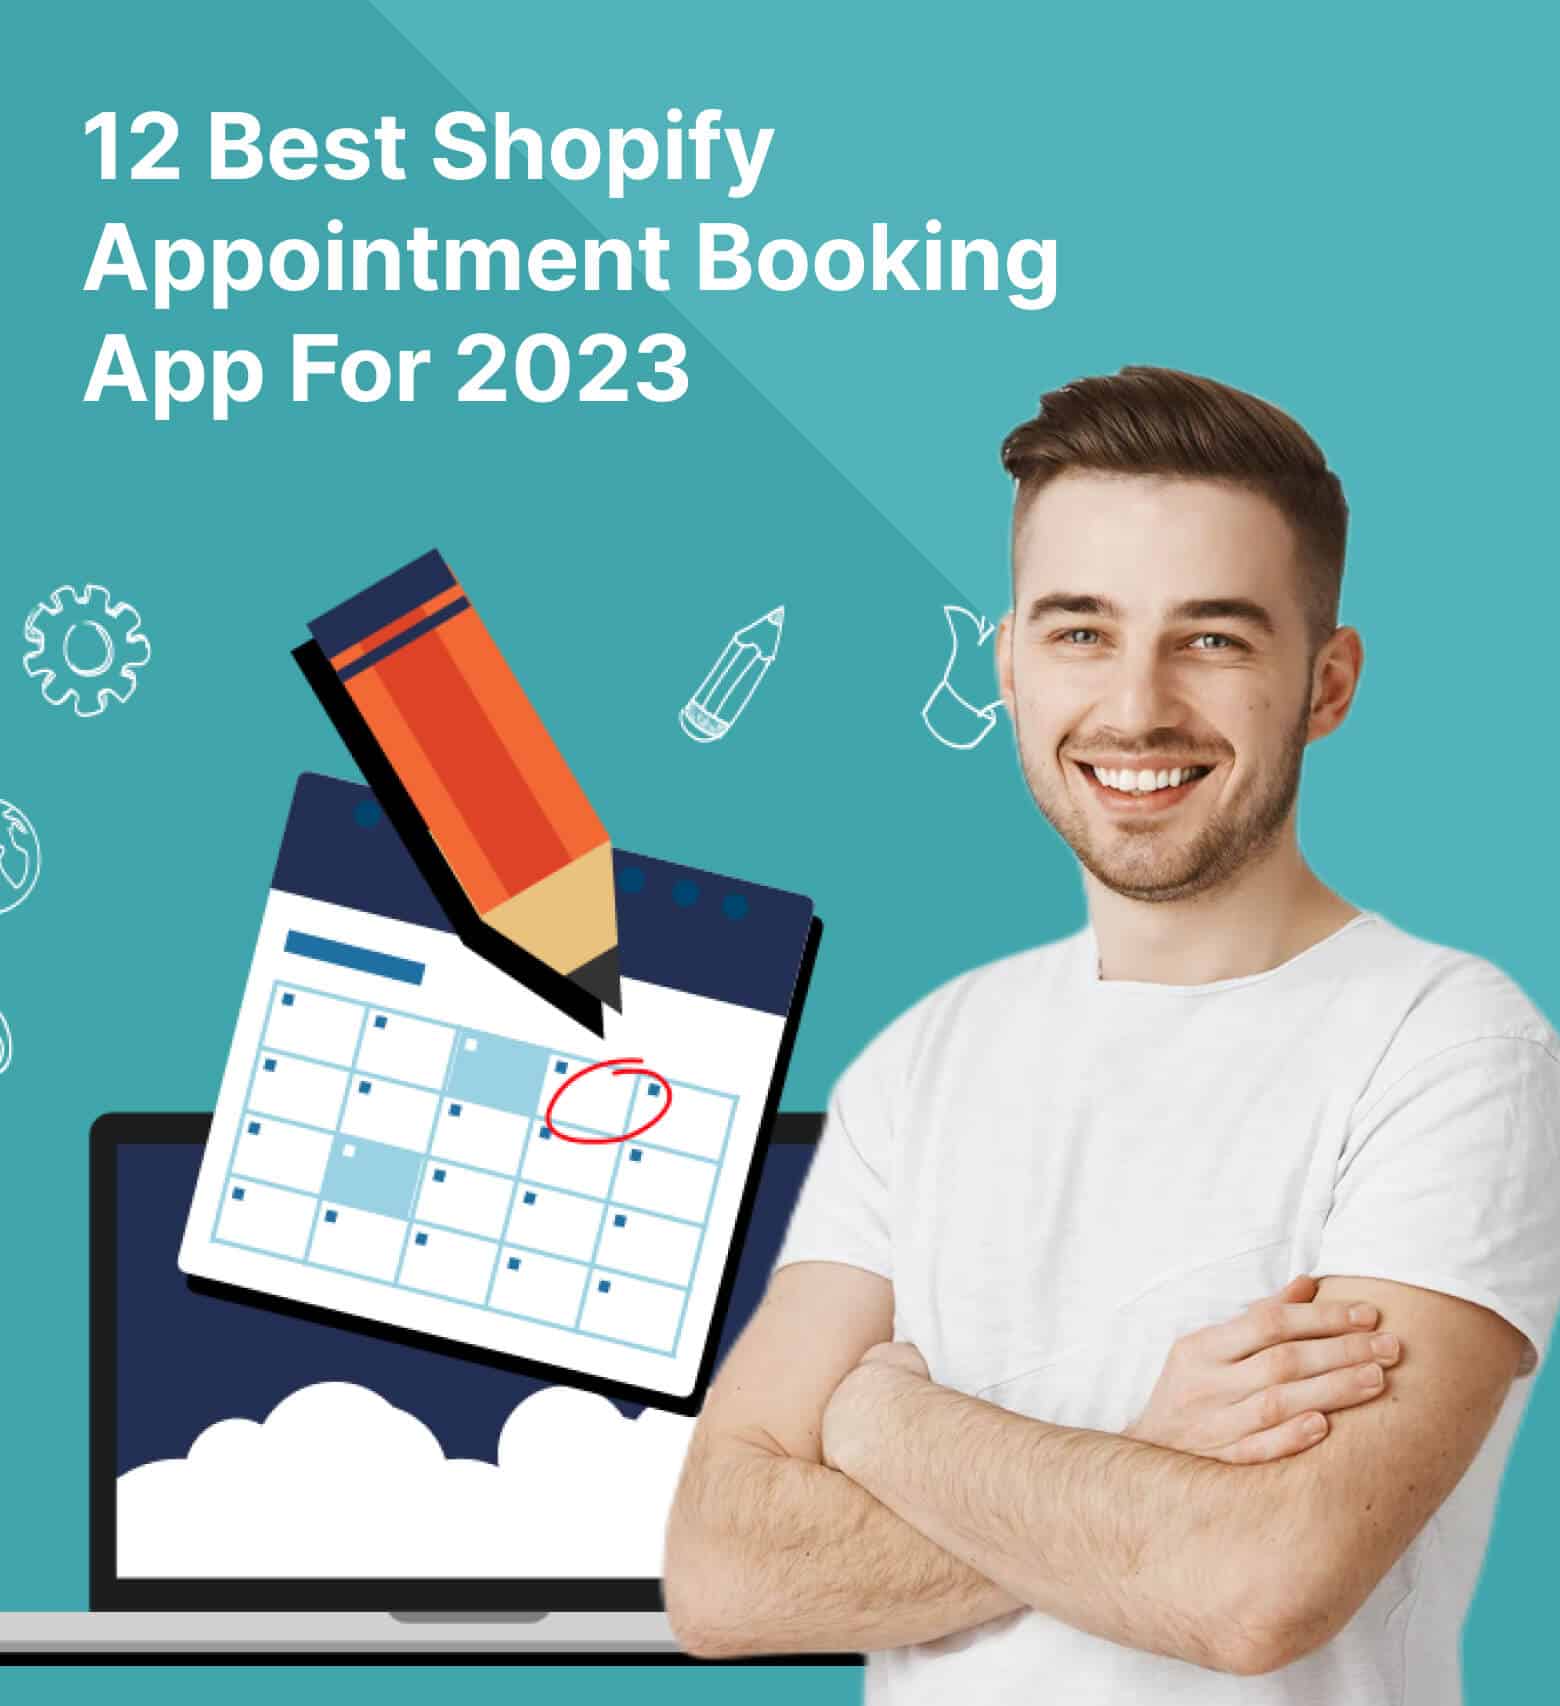 Best Shopify Appointment Booking App